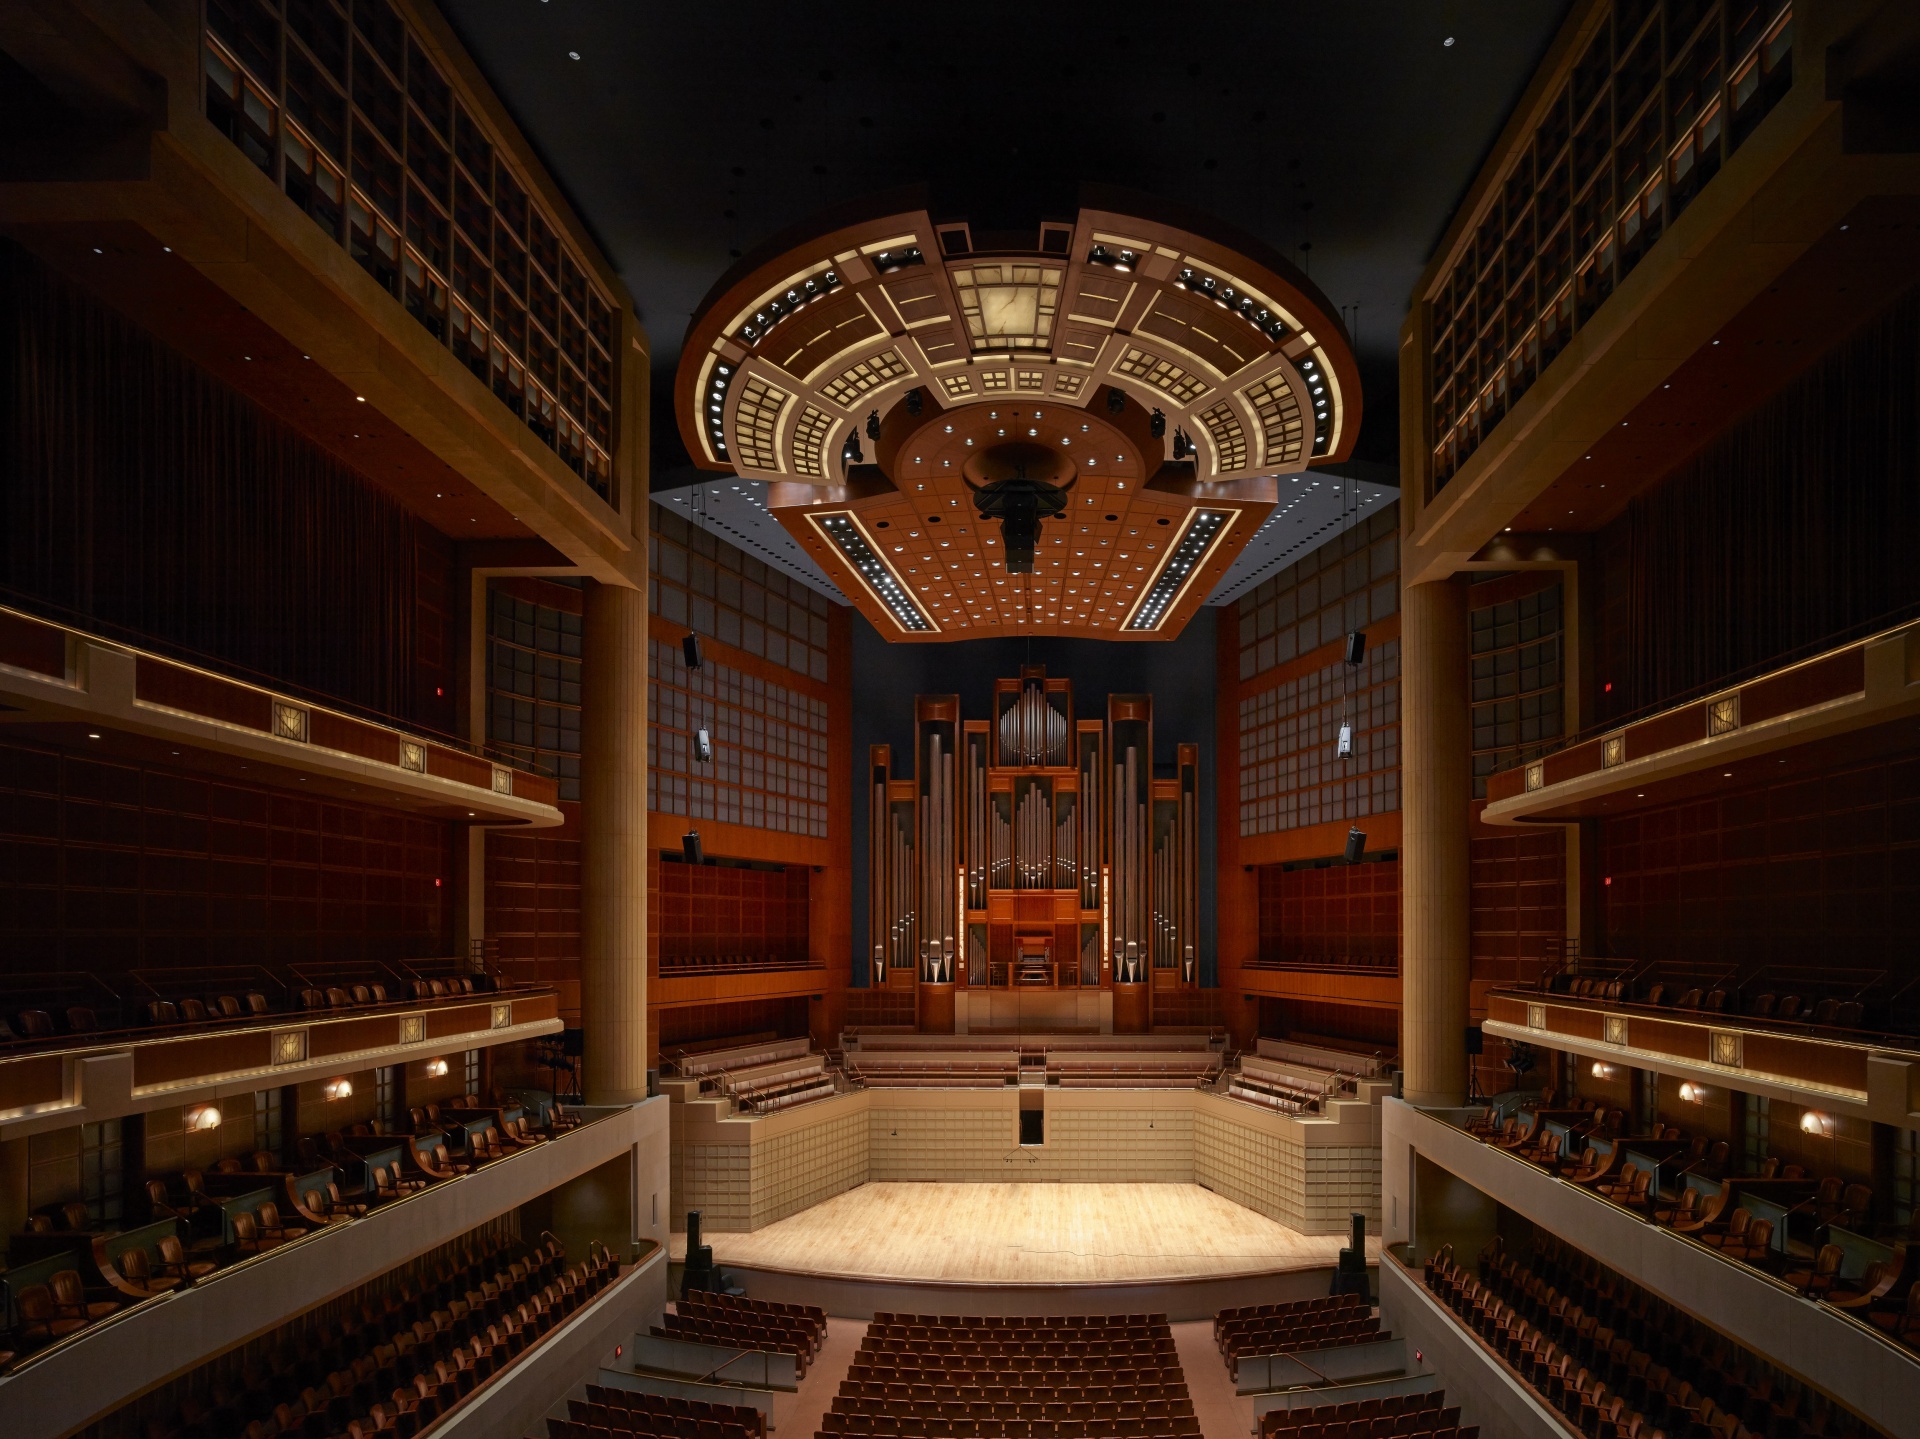 Myerson Symphony Hall Auditiorium in the Arts District of Dallas, Texas USA